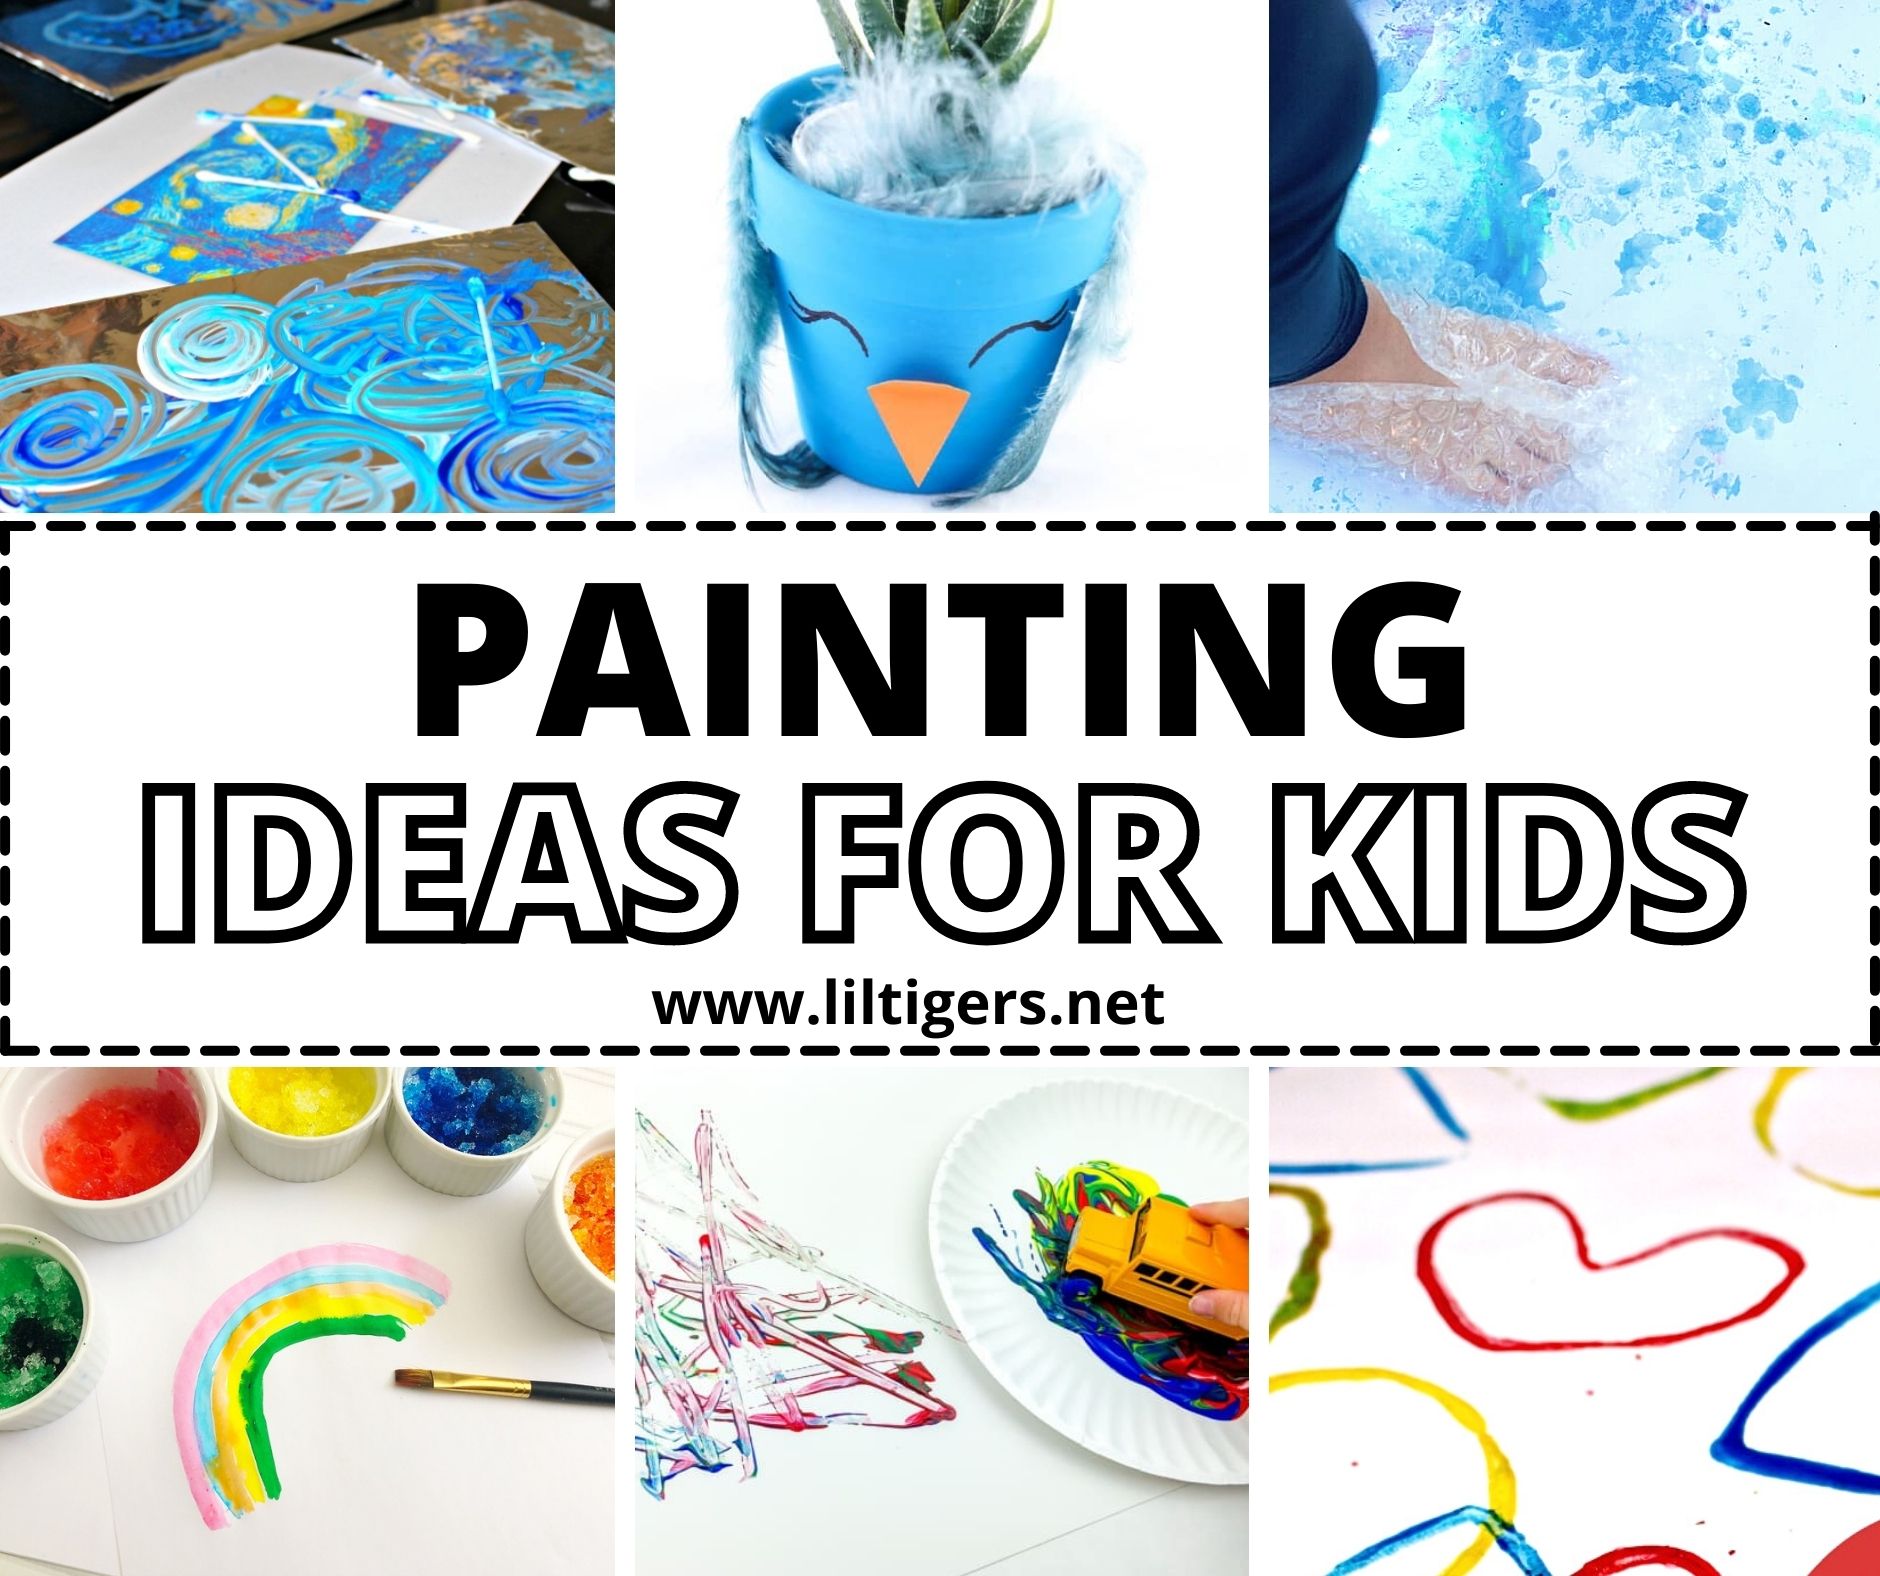 20 Easy Toddler Painting Ideas - My Bored Toddler